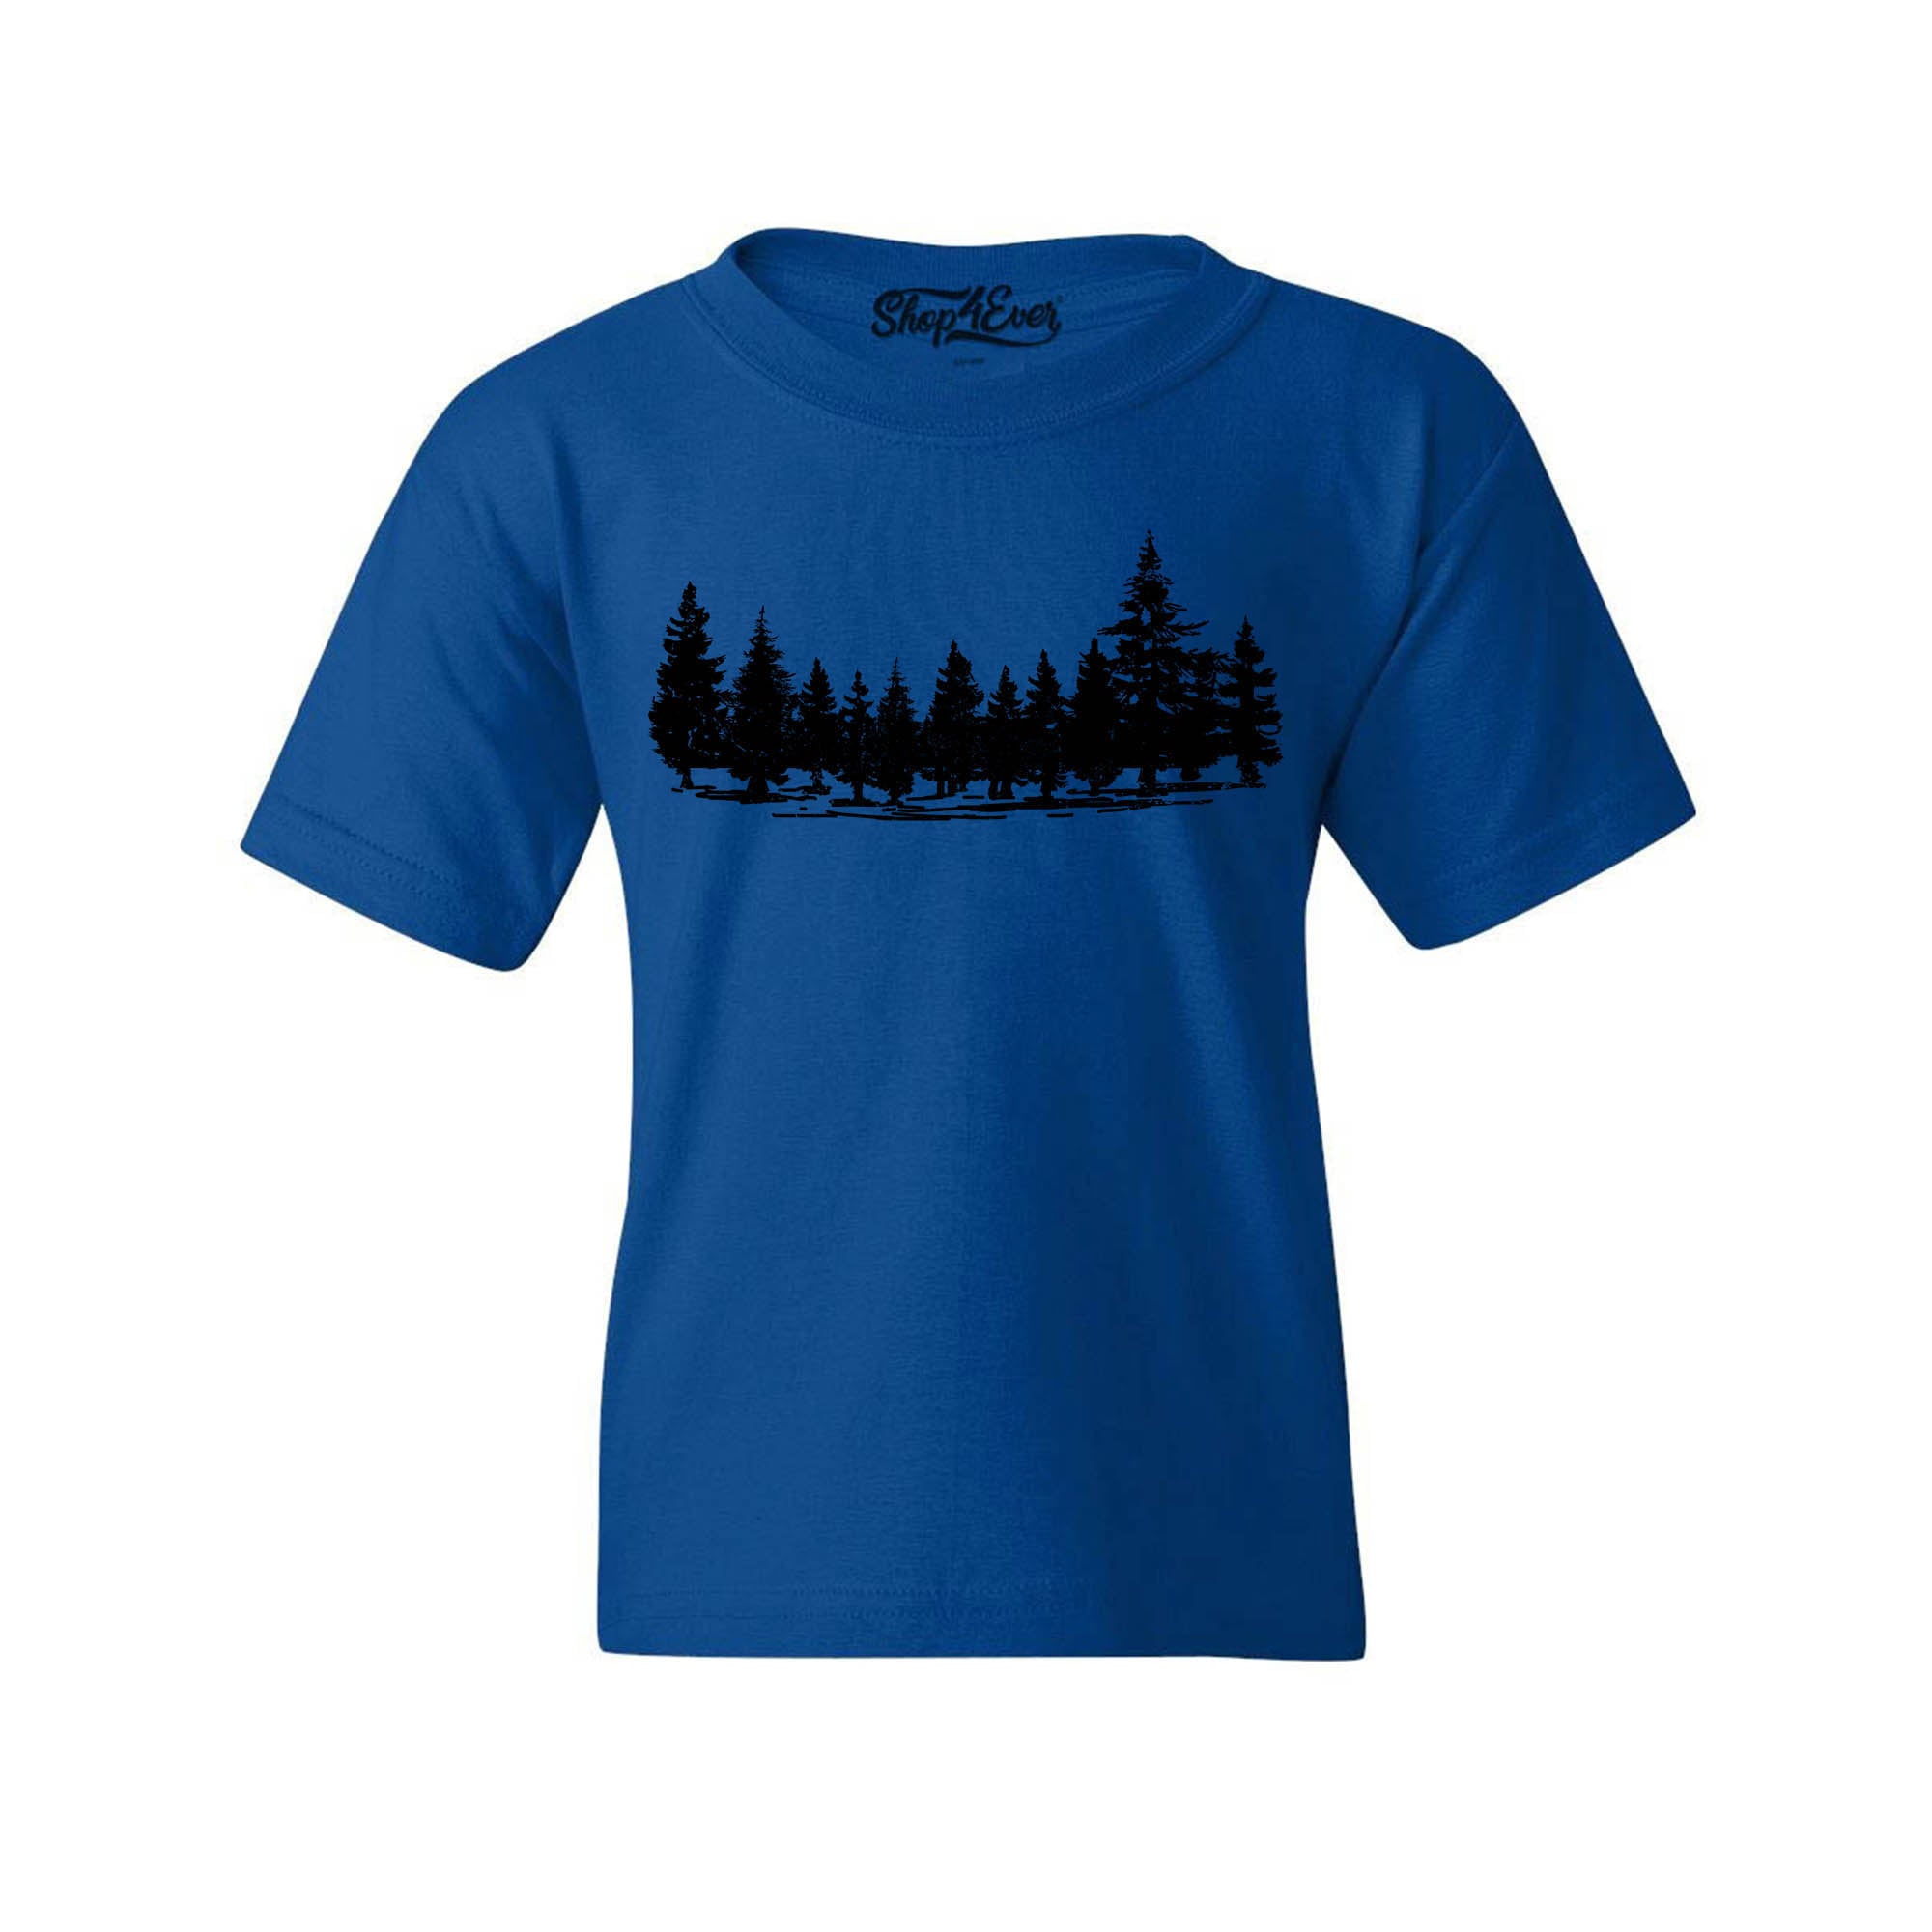 Forest Trees Nature Mountains Wildlife Child's T-Shirt Kids Tee